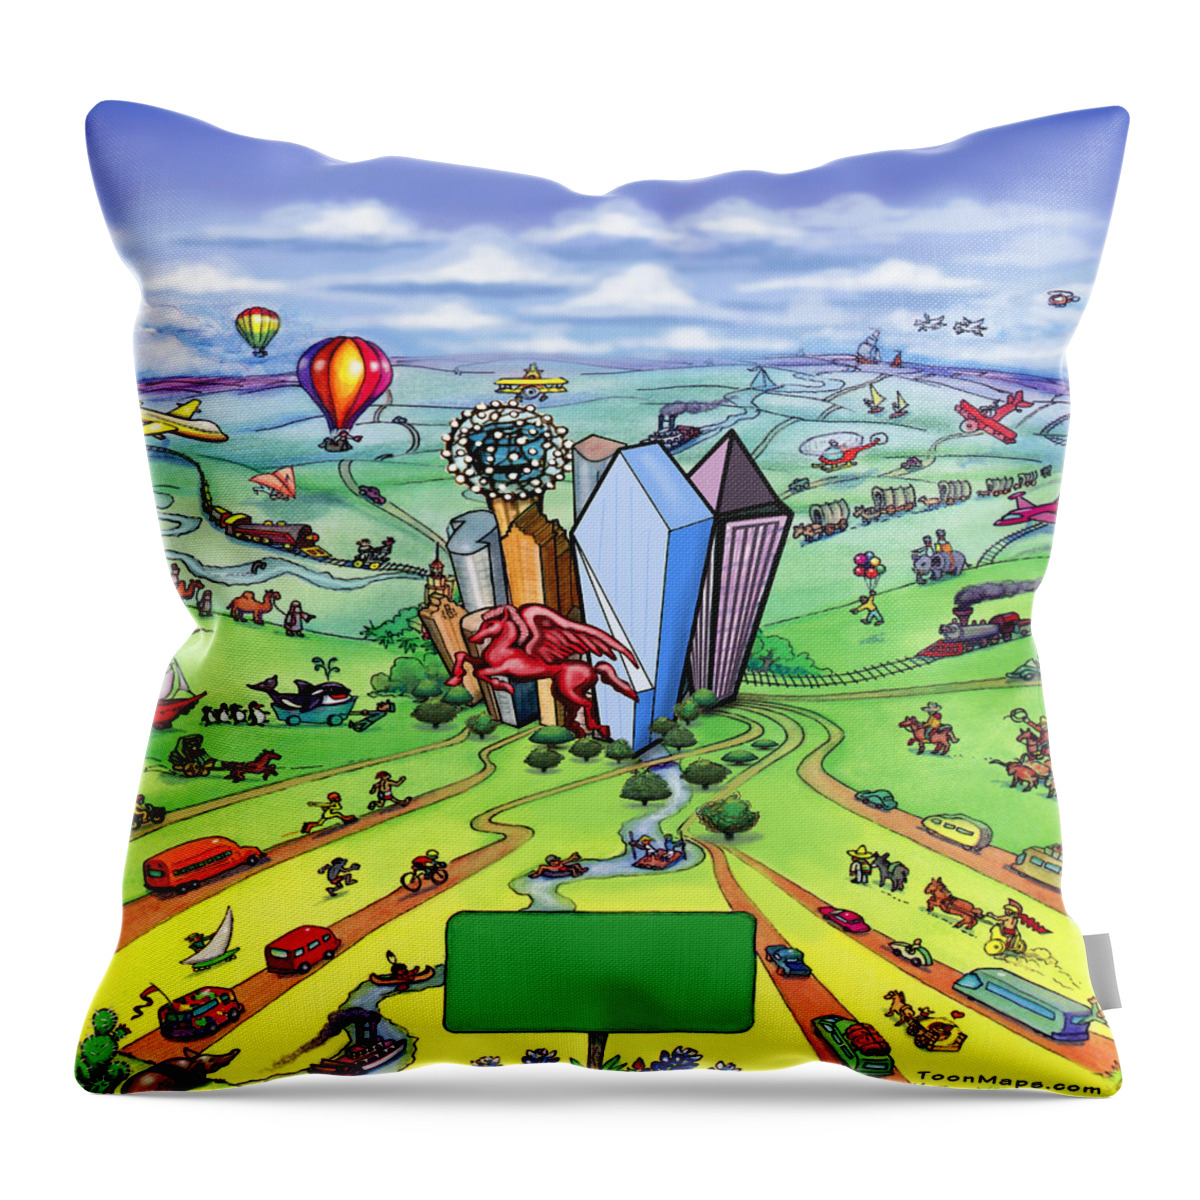 Dallas Throw Pillow featuring the digital art All roads lead to Dallas Texas by Kevin Middleton